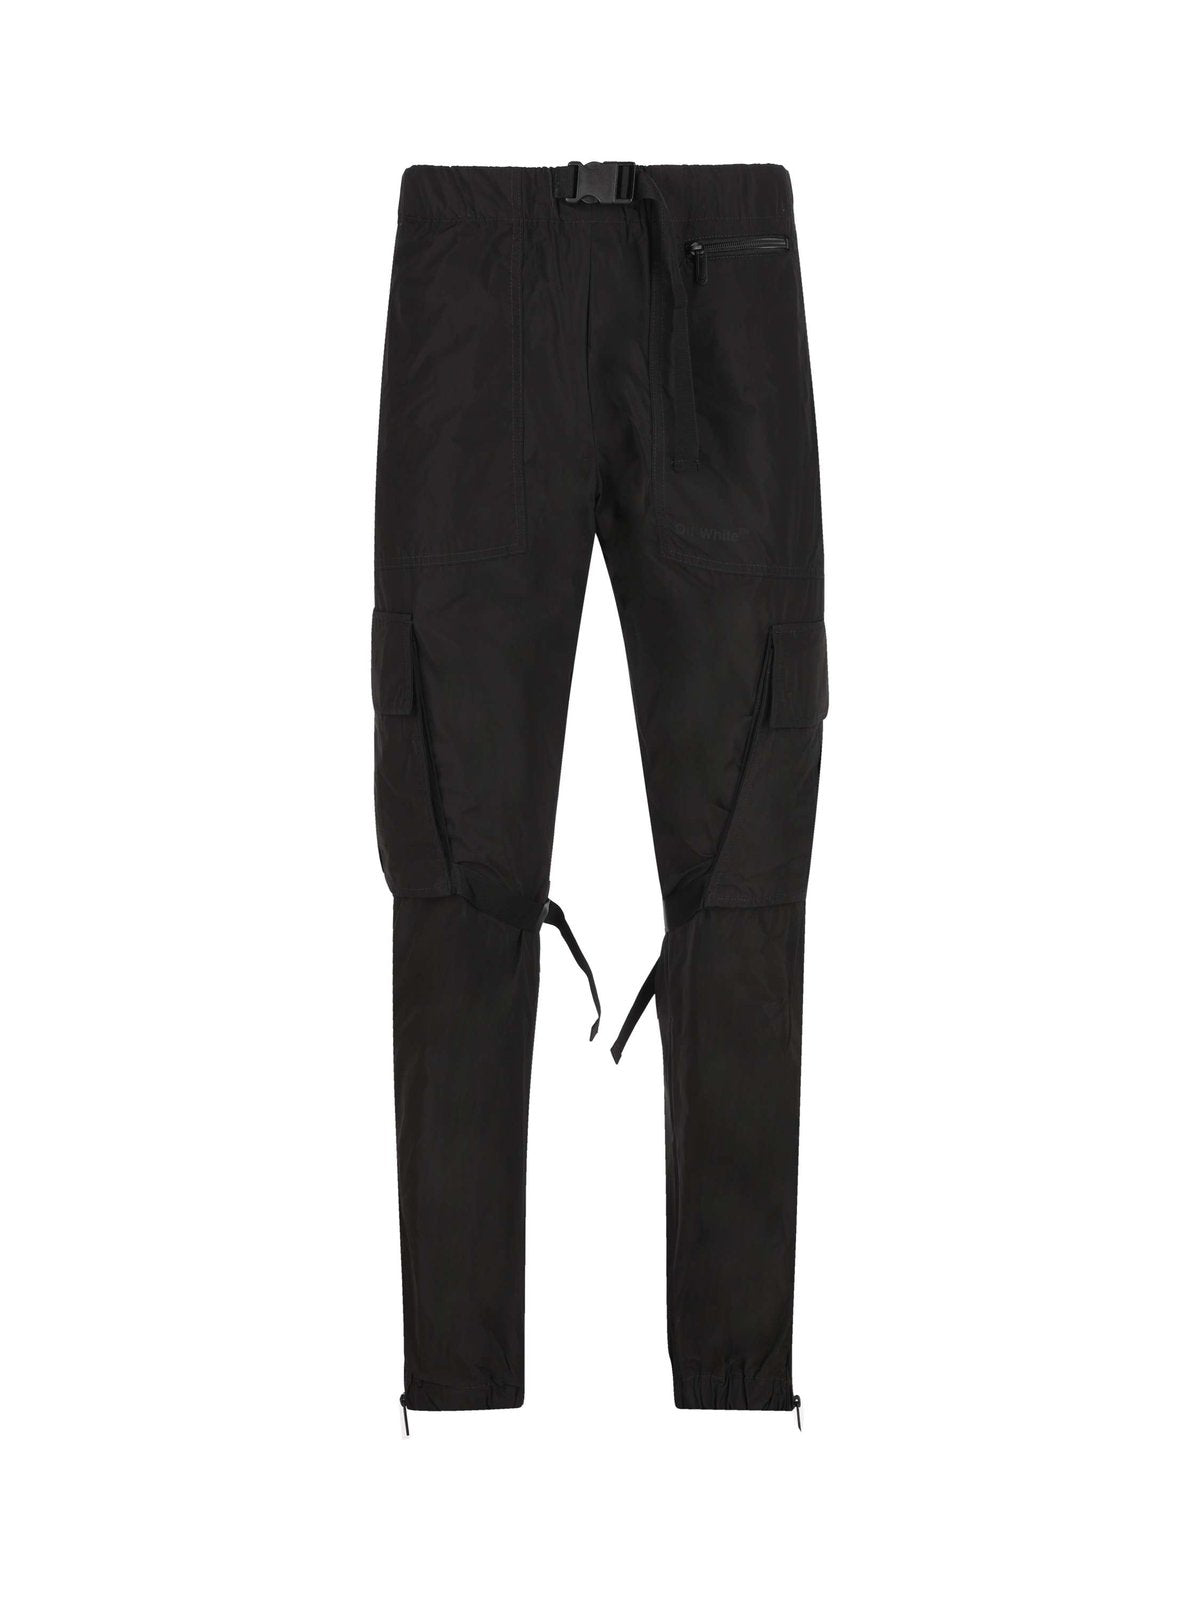 Off-White Belted Waist Straight Leg Trousers